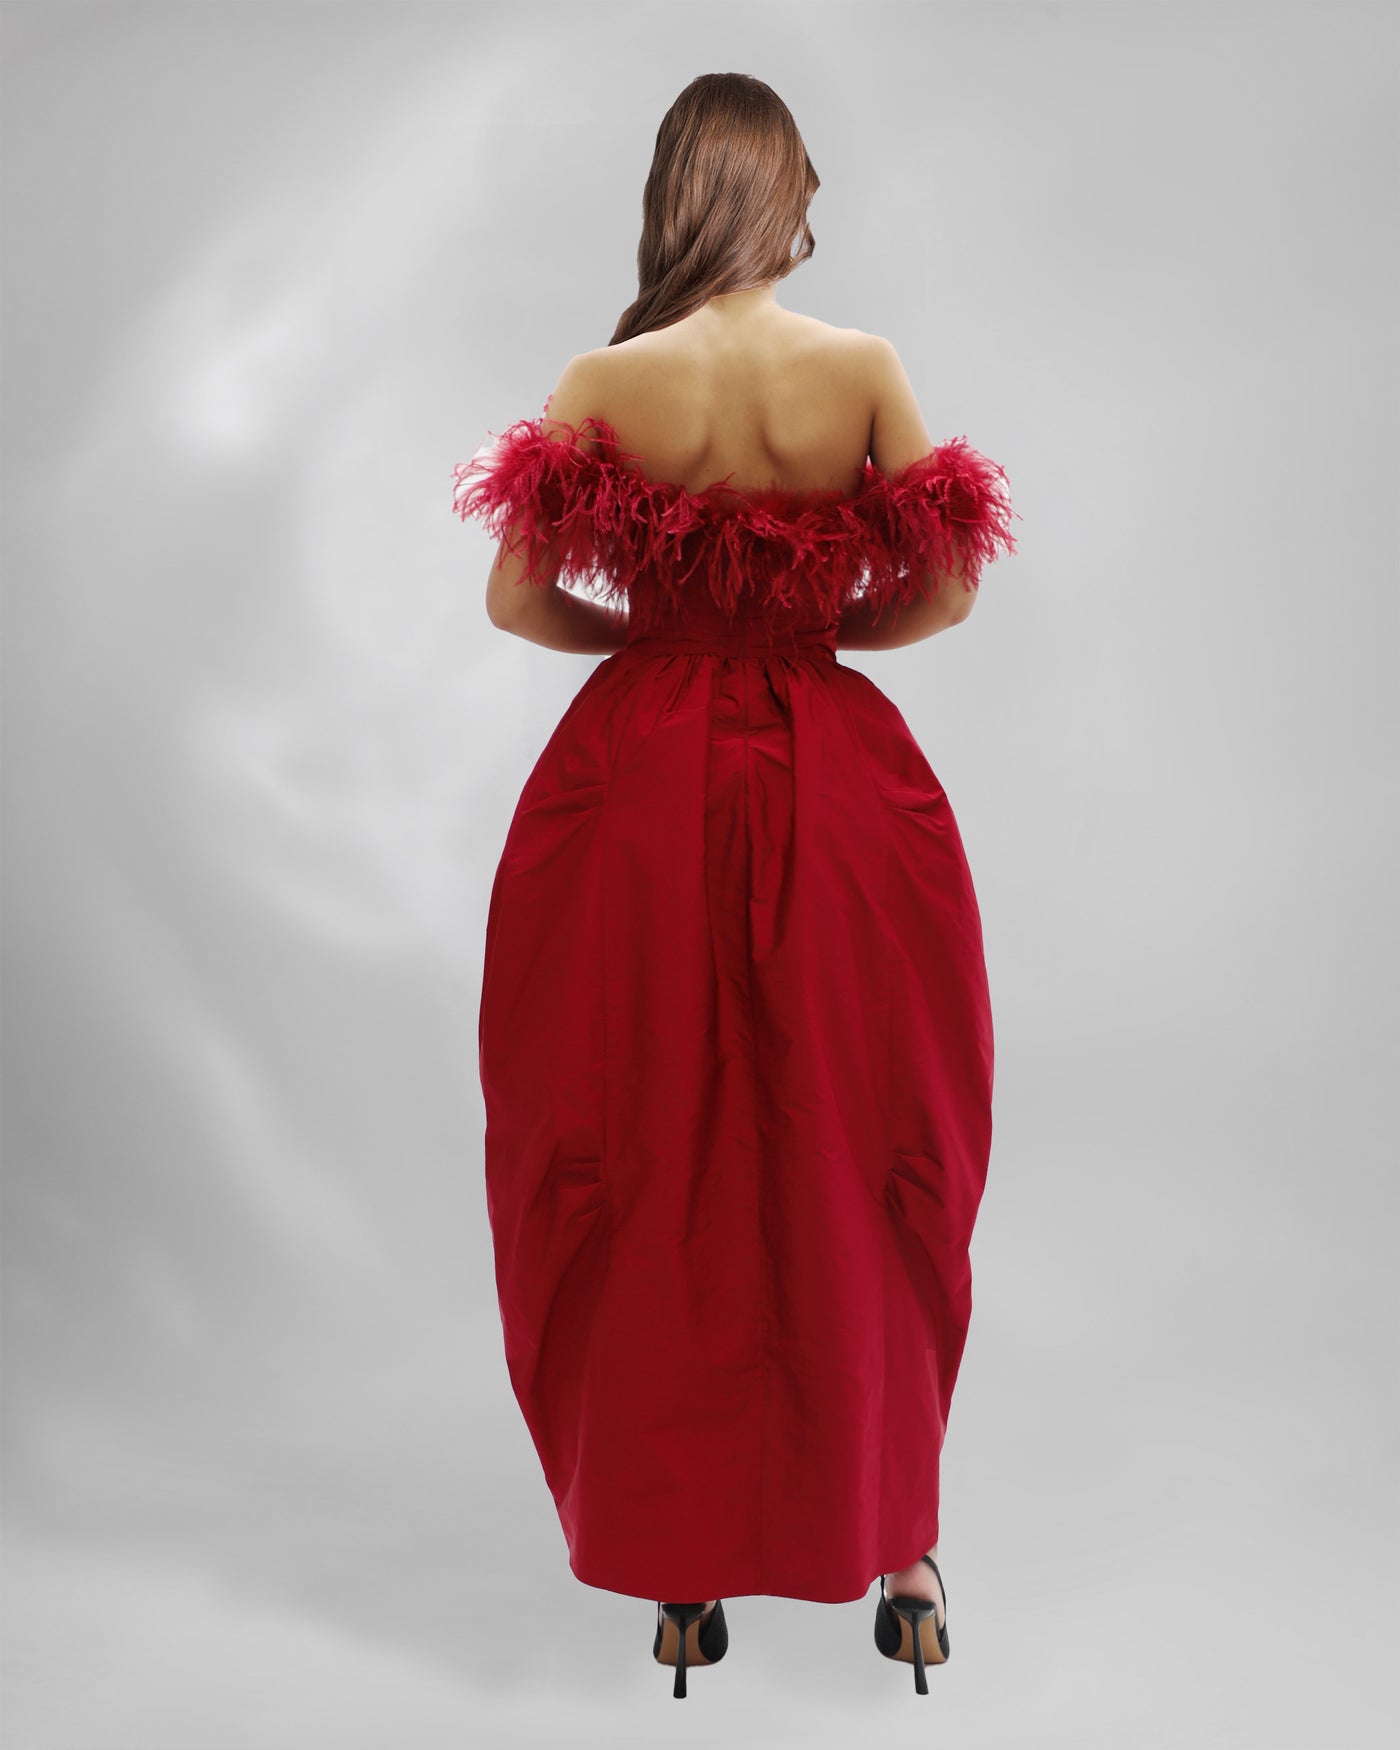 Feathered Puffed Red Dress